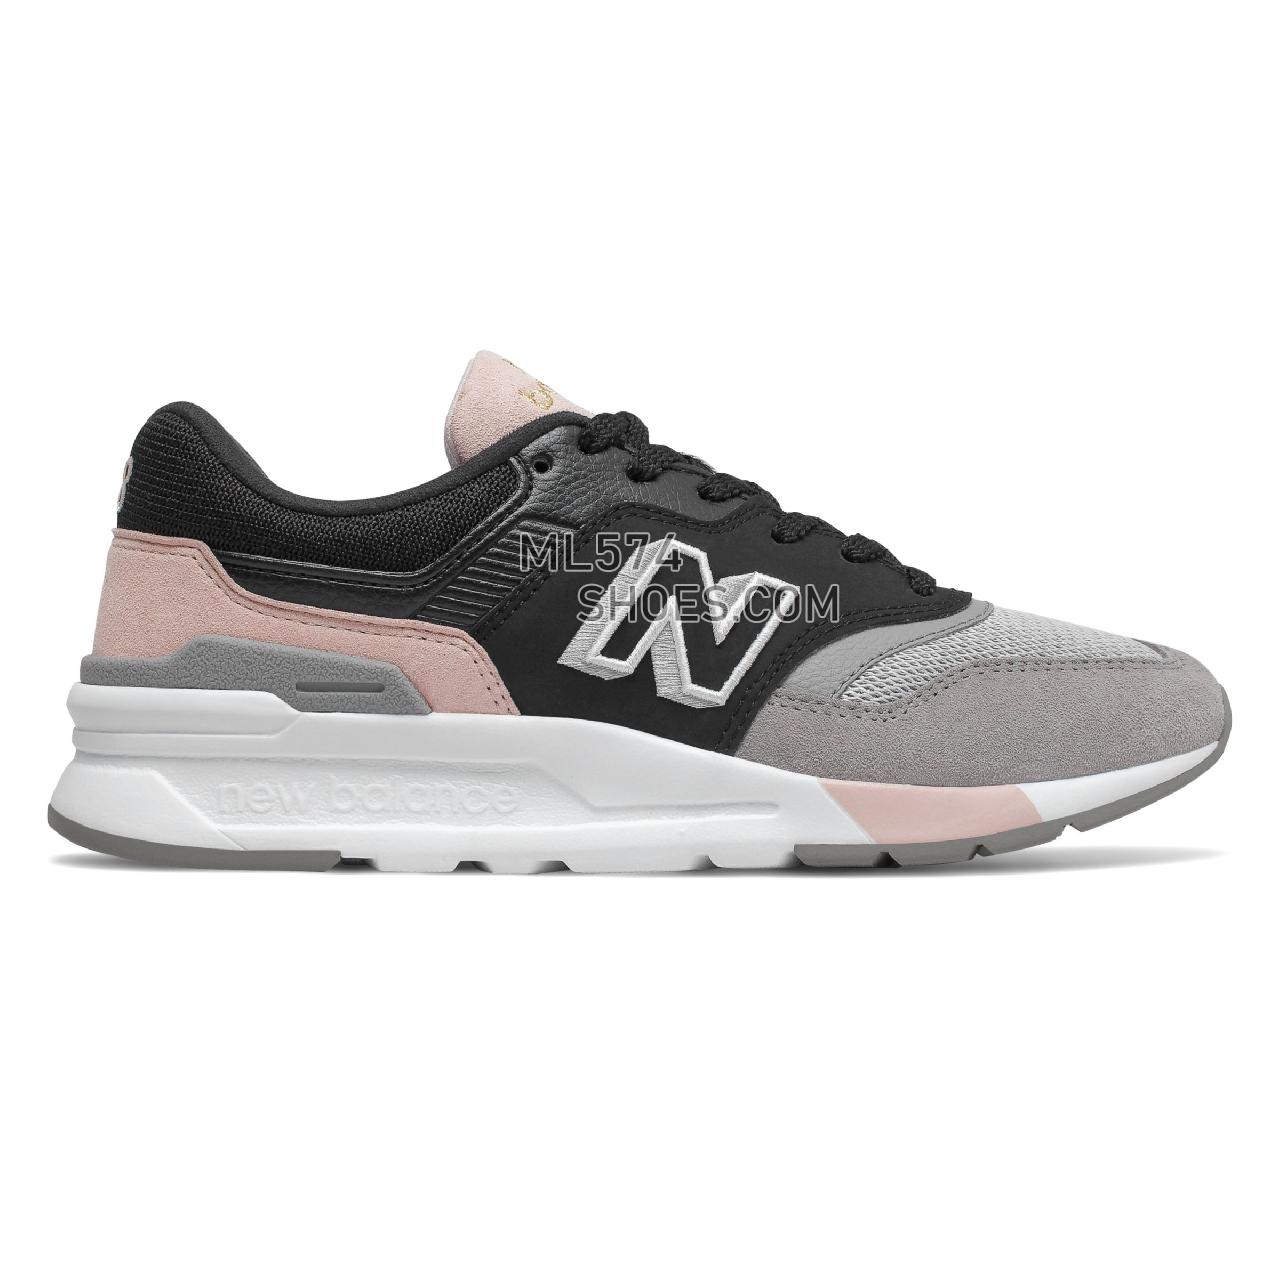 New Balance 997H - Women's Classic Sneakers - Black with Smoked Salt - CW997HAL